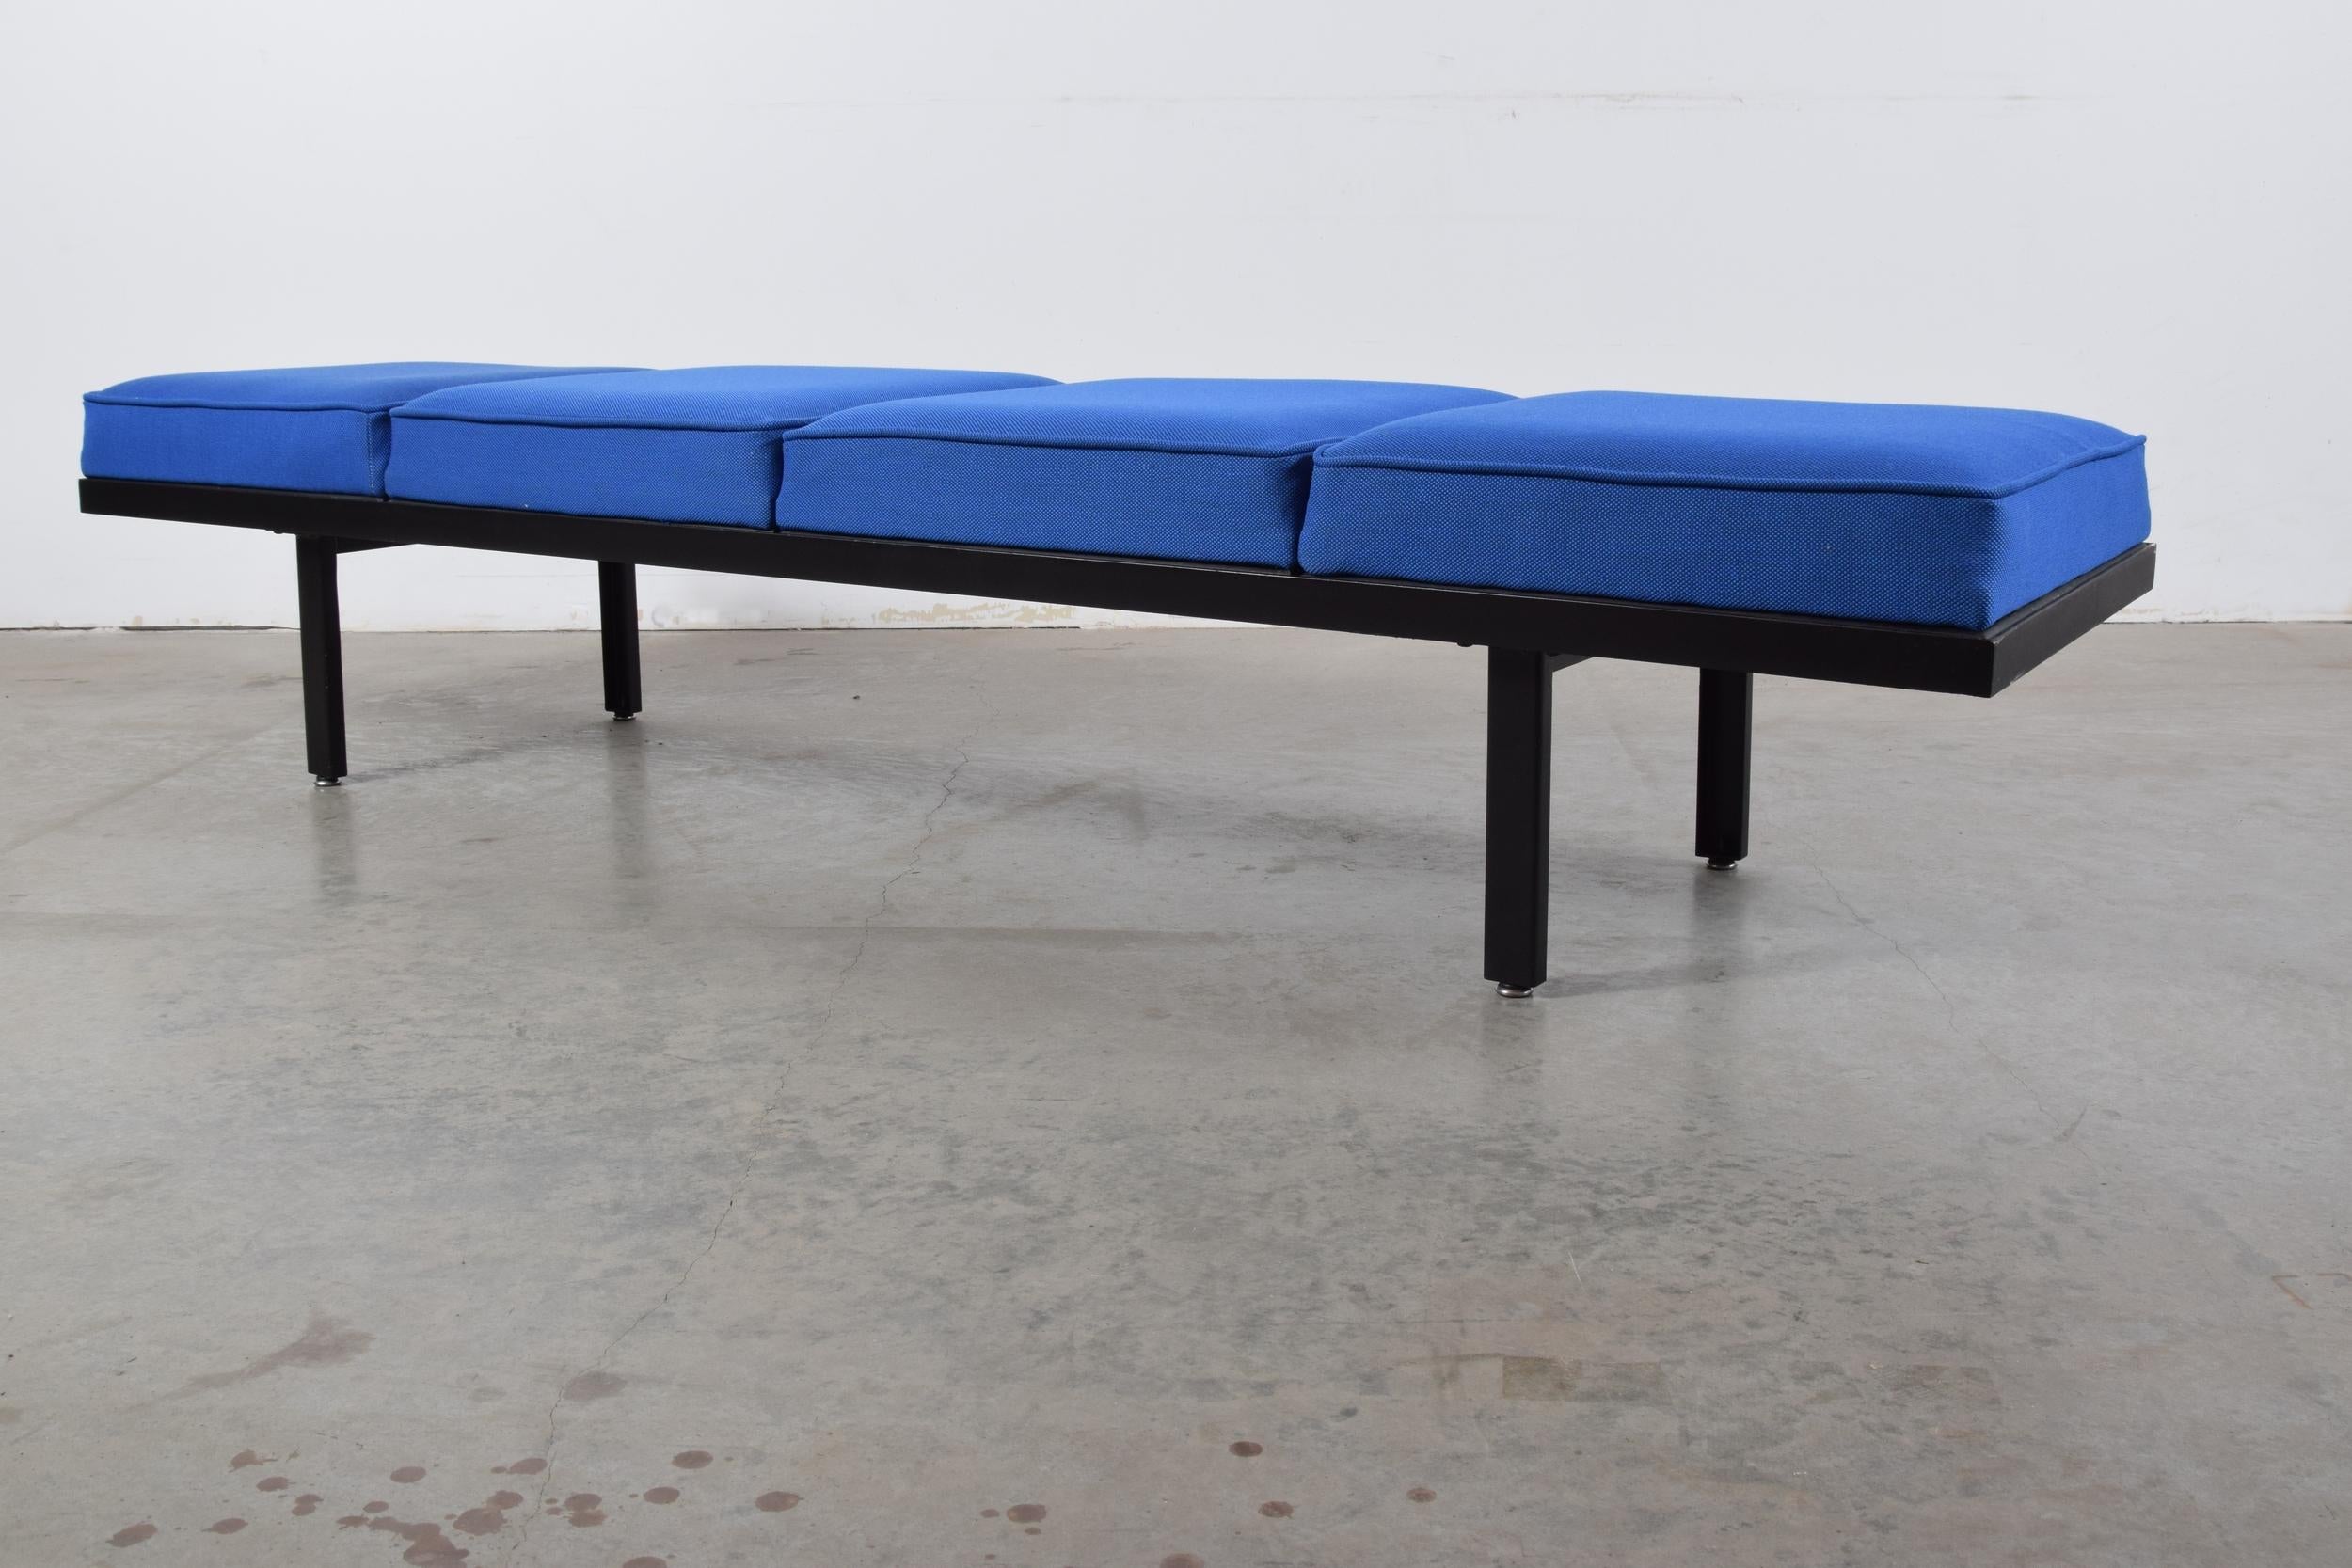 Steel frame bench designed by George Nelson for Herman Miller, circa 1956. Bench has been newly upholstered in Maharam Steelcut Trio blue wool fabric. Bench measures 80 3/4